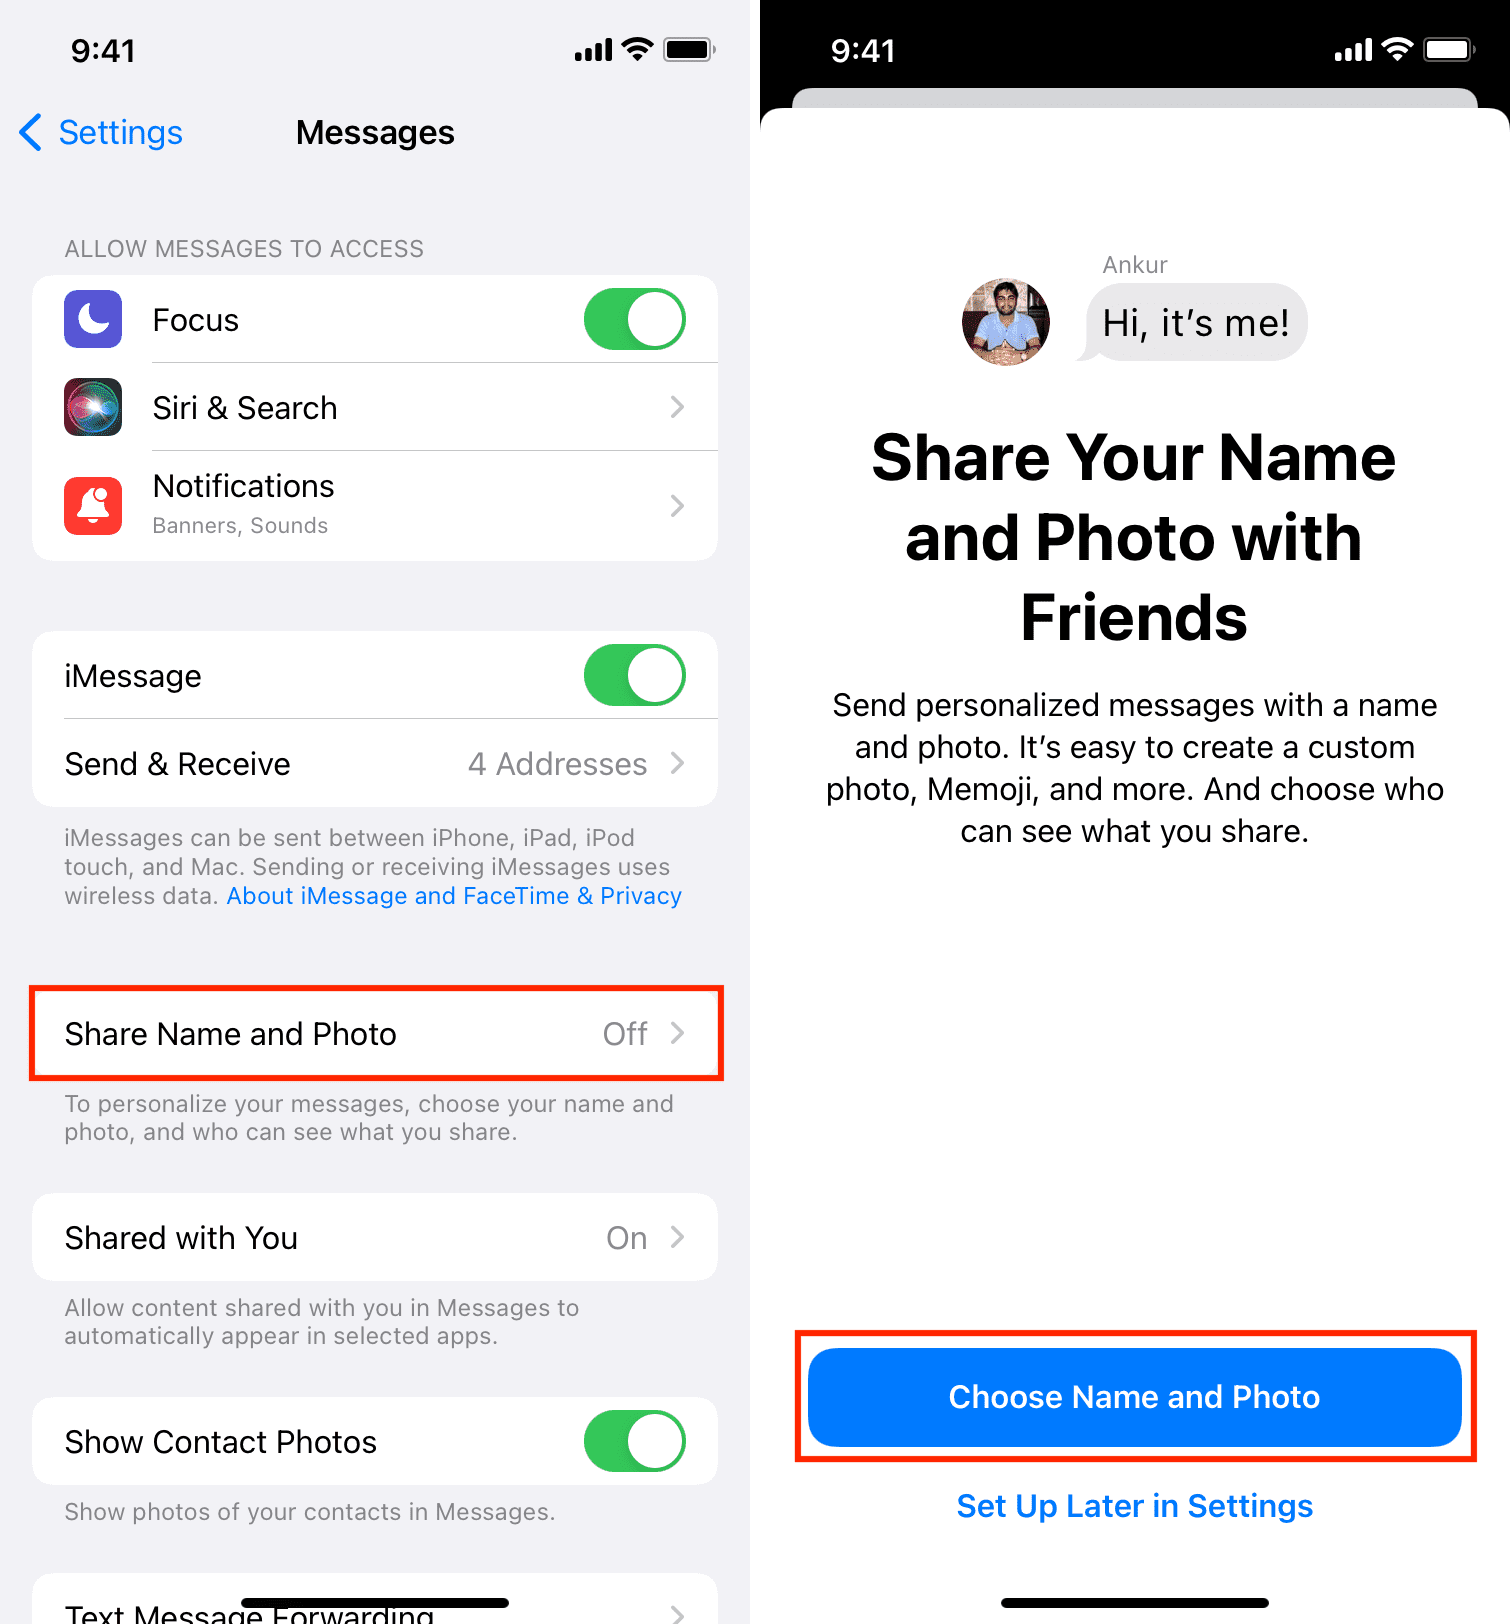 Share Name and Photo in iPhone Messages Settings